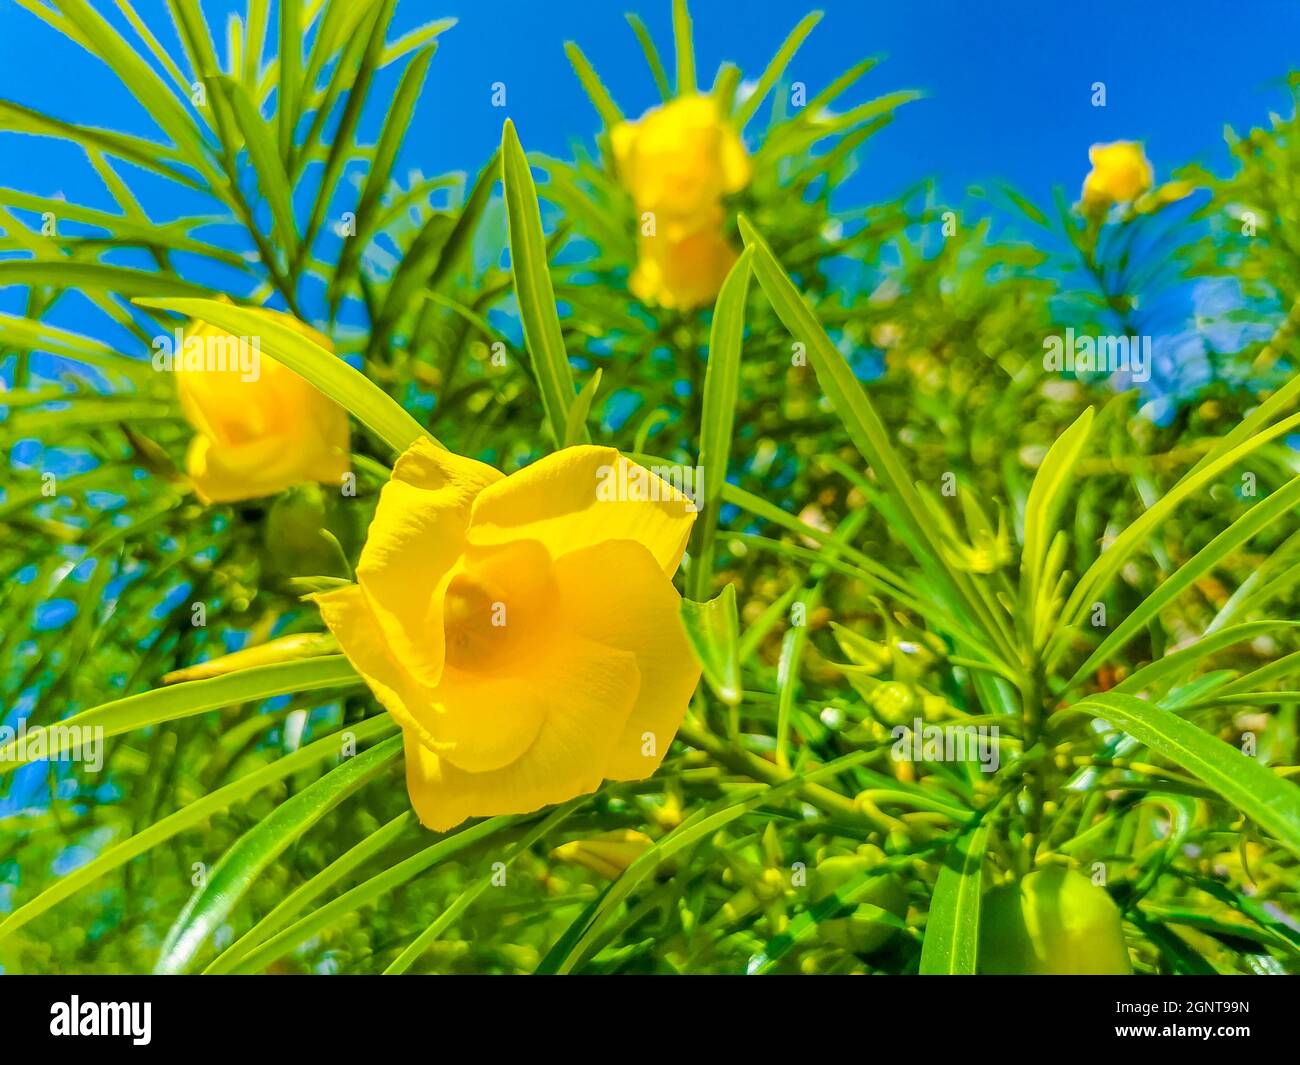 Yellow Oleander flower on tree with green leaves and blue sky in ...